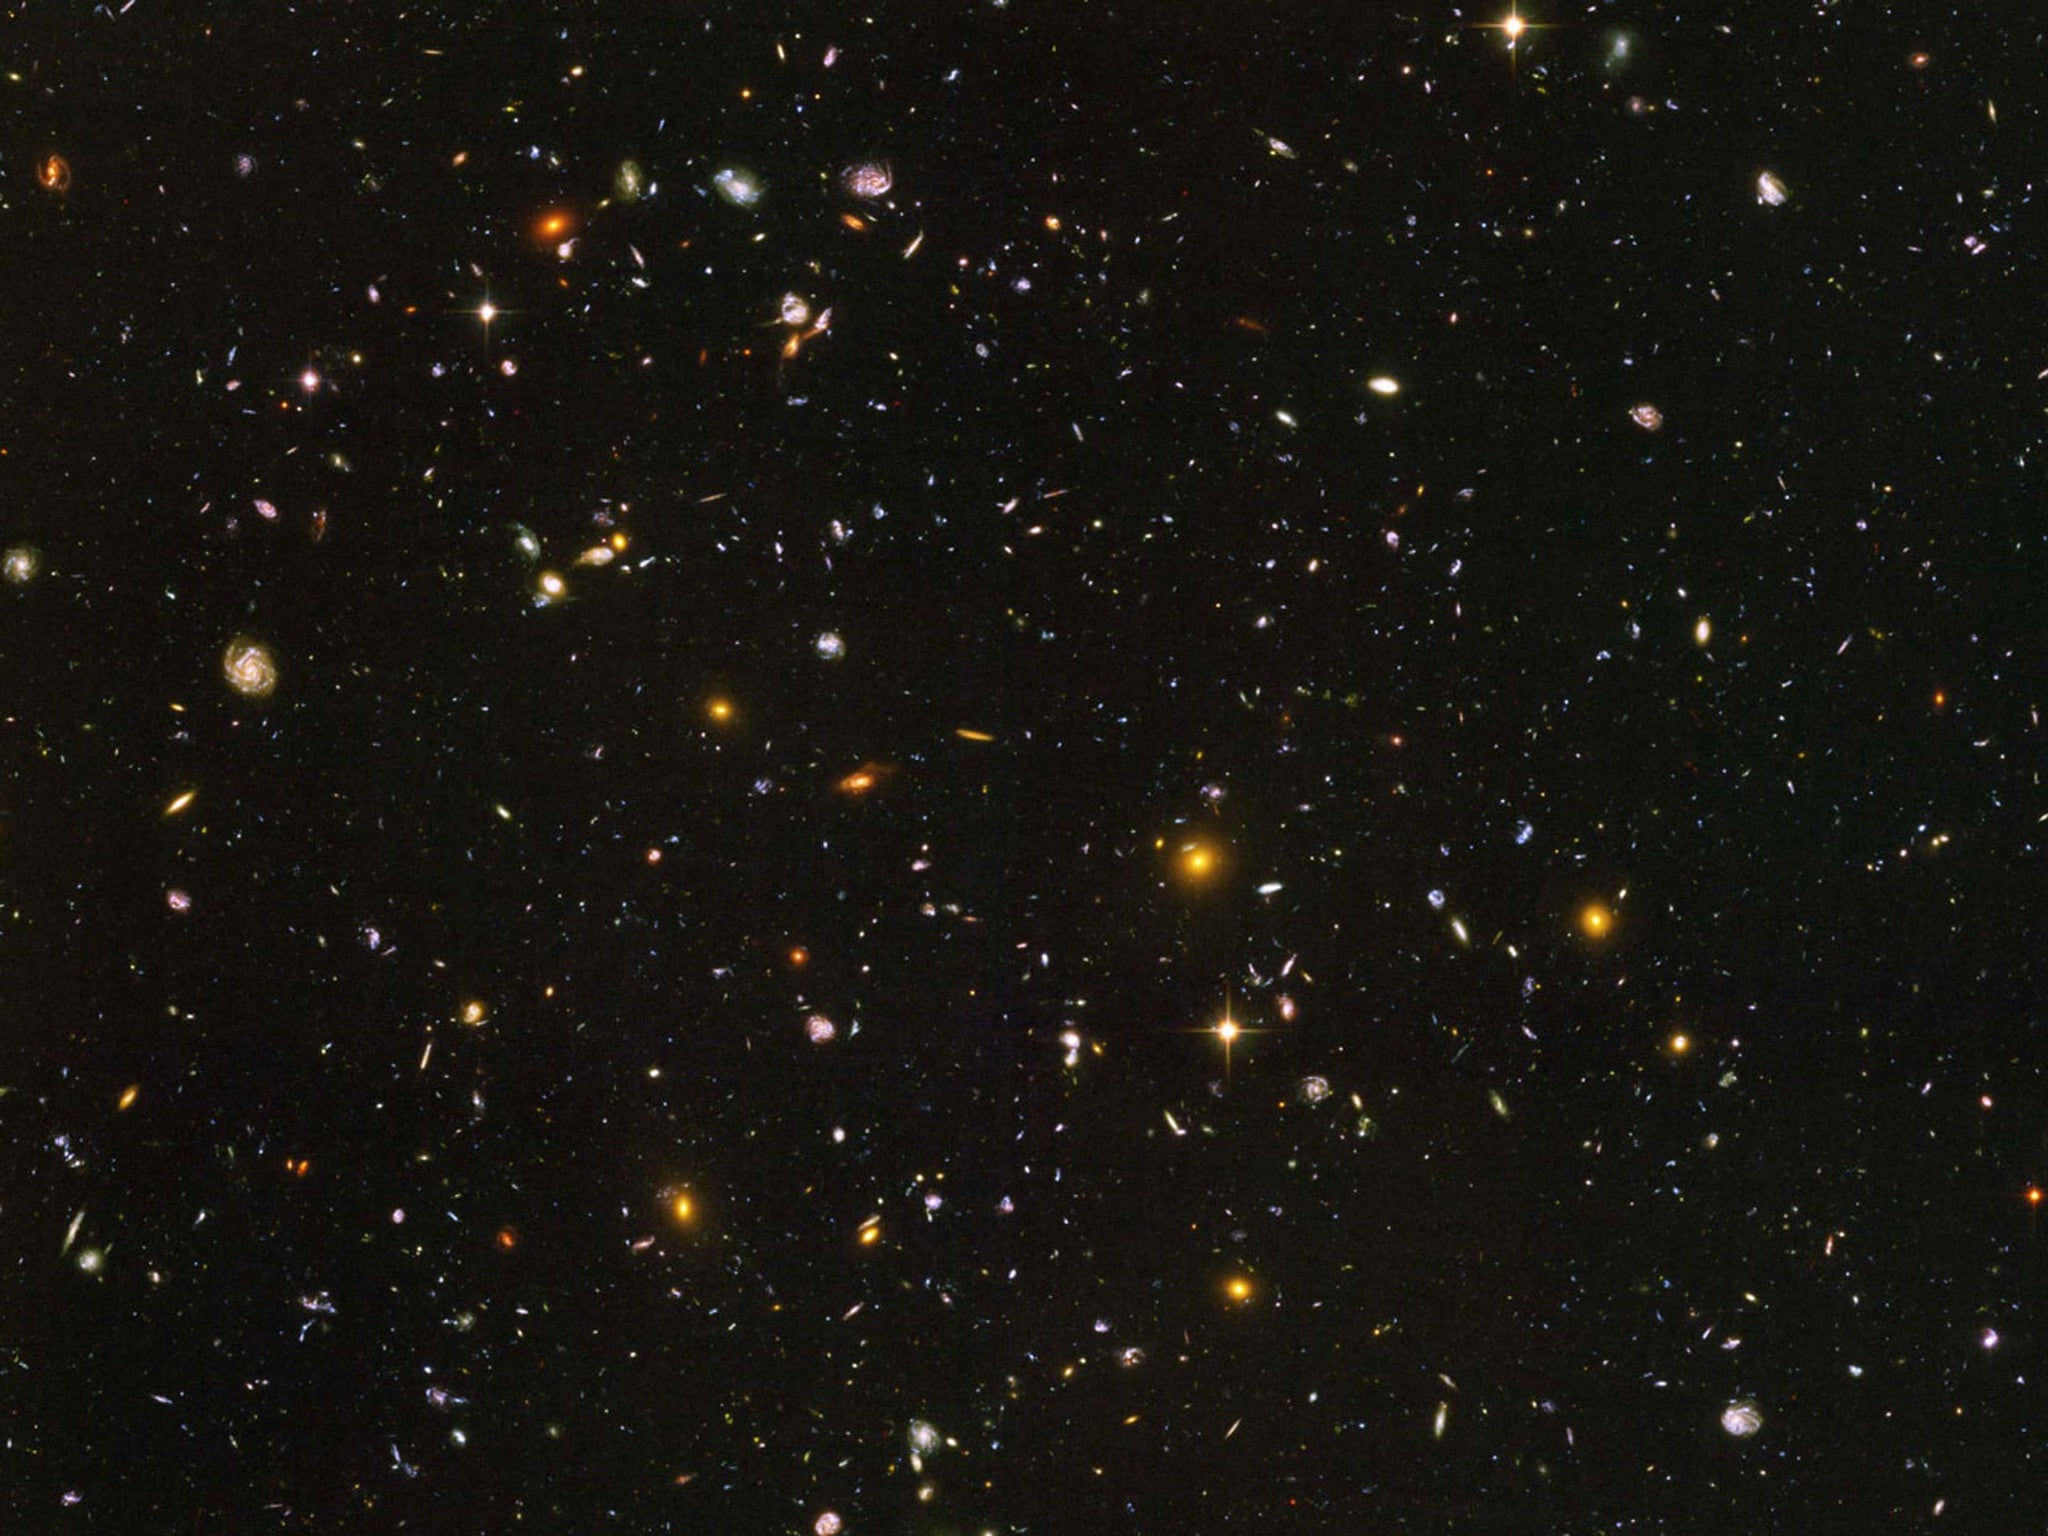 A photo from one of Hubble's deepest looks into the visible universe, showing some of the first galaxies created during the Big Bang. Photo: NASA/ESA/S. Beckwith(STScI) and The HUDF Team